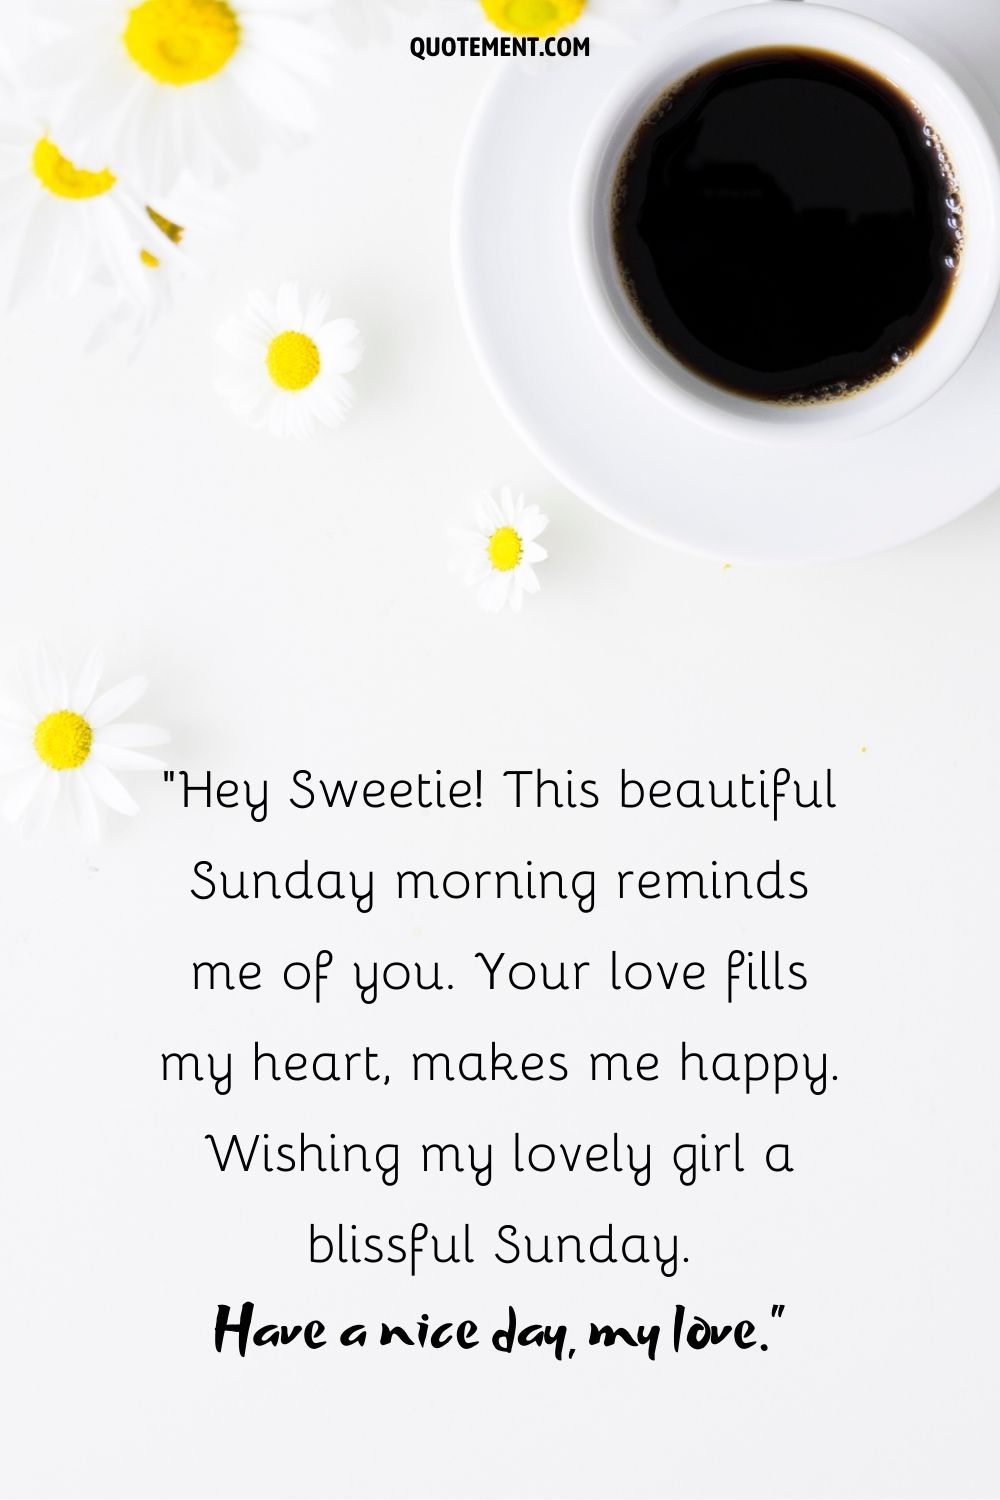 black coffee with flower decoration representing good morning sunday wish for her